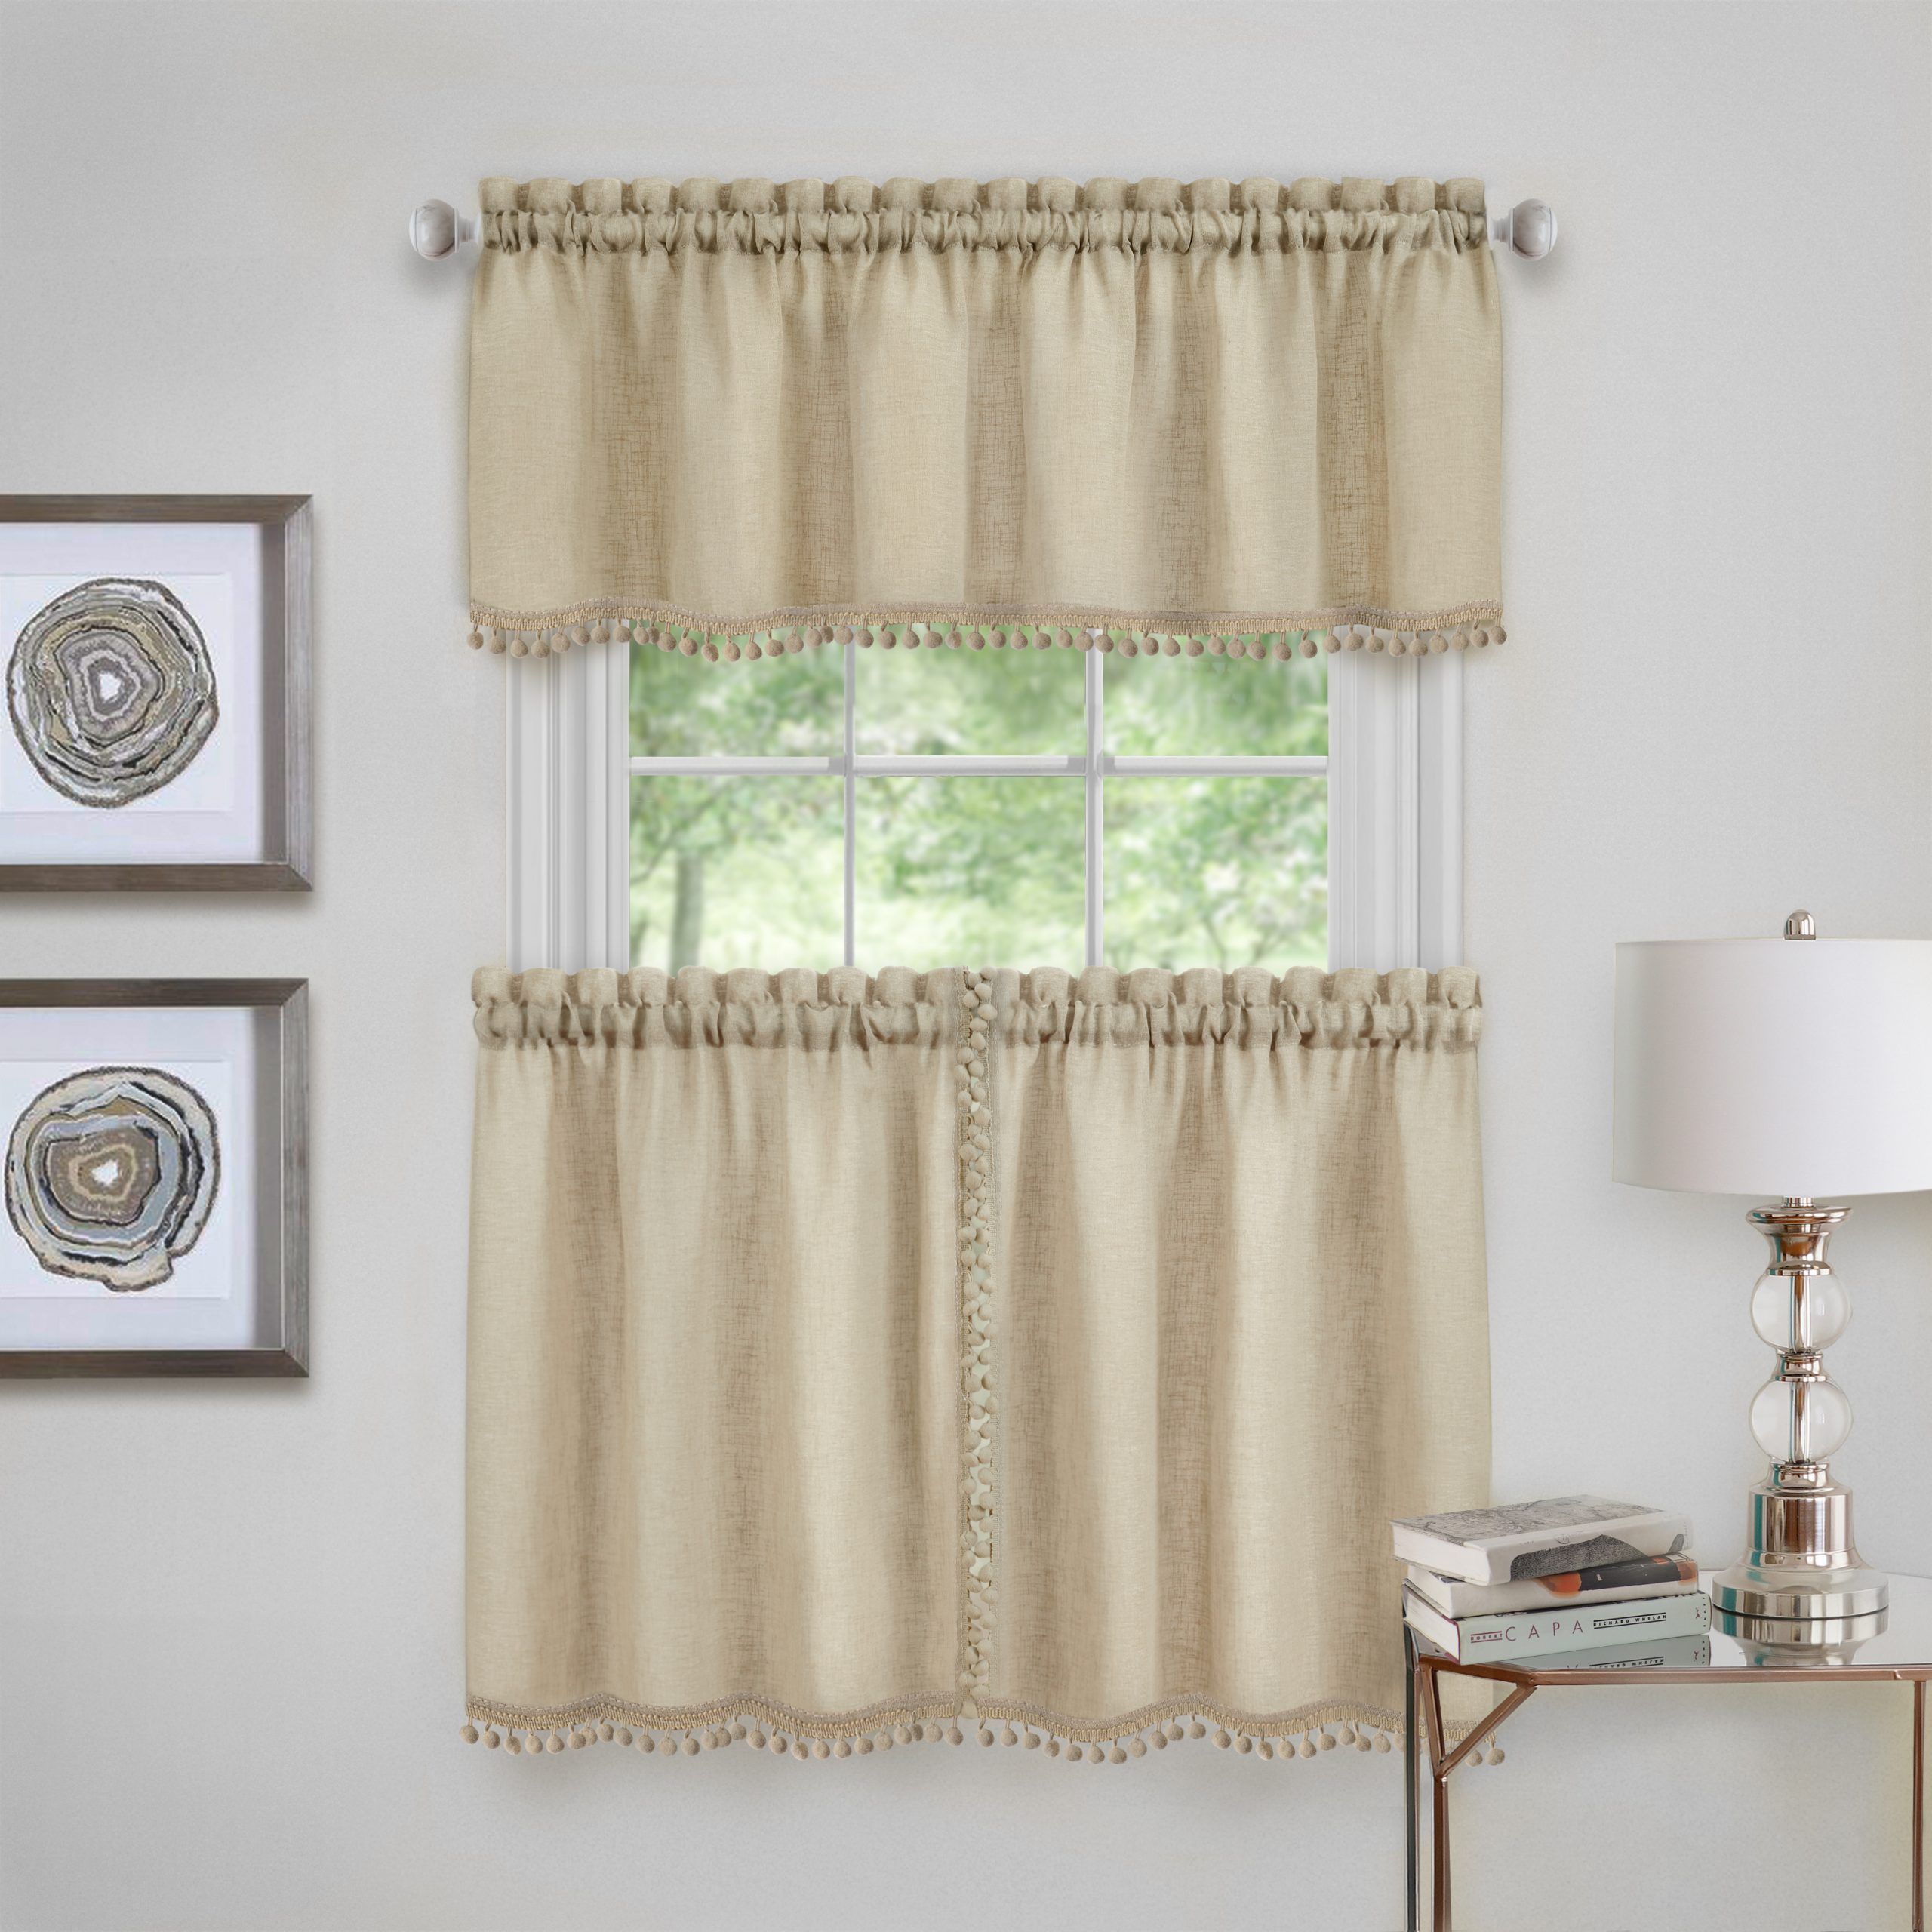 Achim Wallace Window Kitchen Curtain Tier Pair And Valance Set – 58x24 –  Linen Pertaining To Live, Love, Laugh Window Curtain Tier Pair And Valance Sets (Photo 8 of 20)